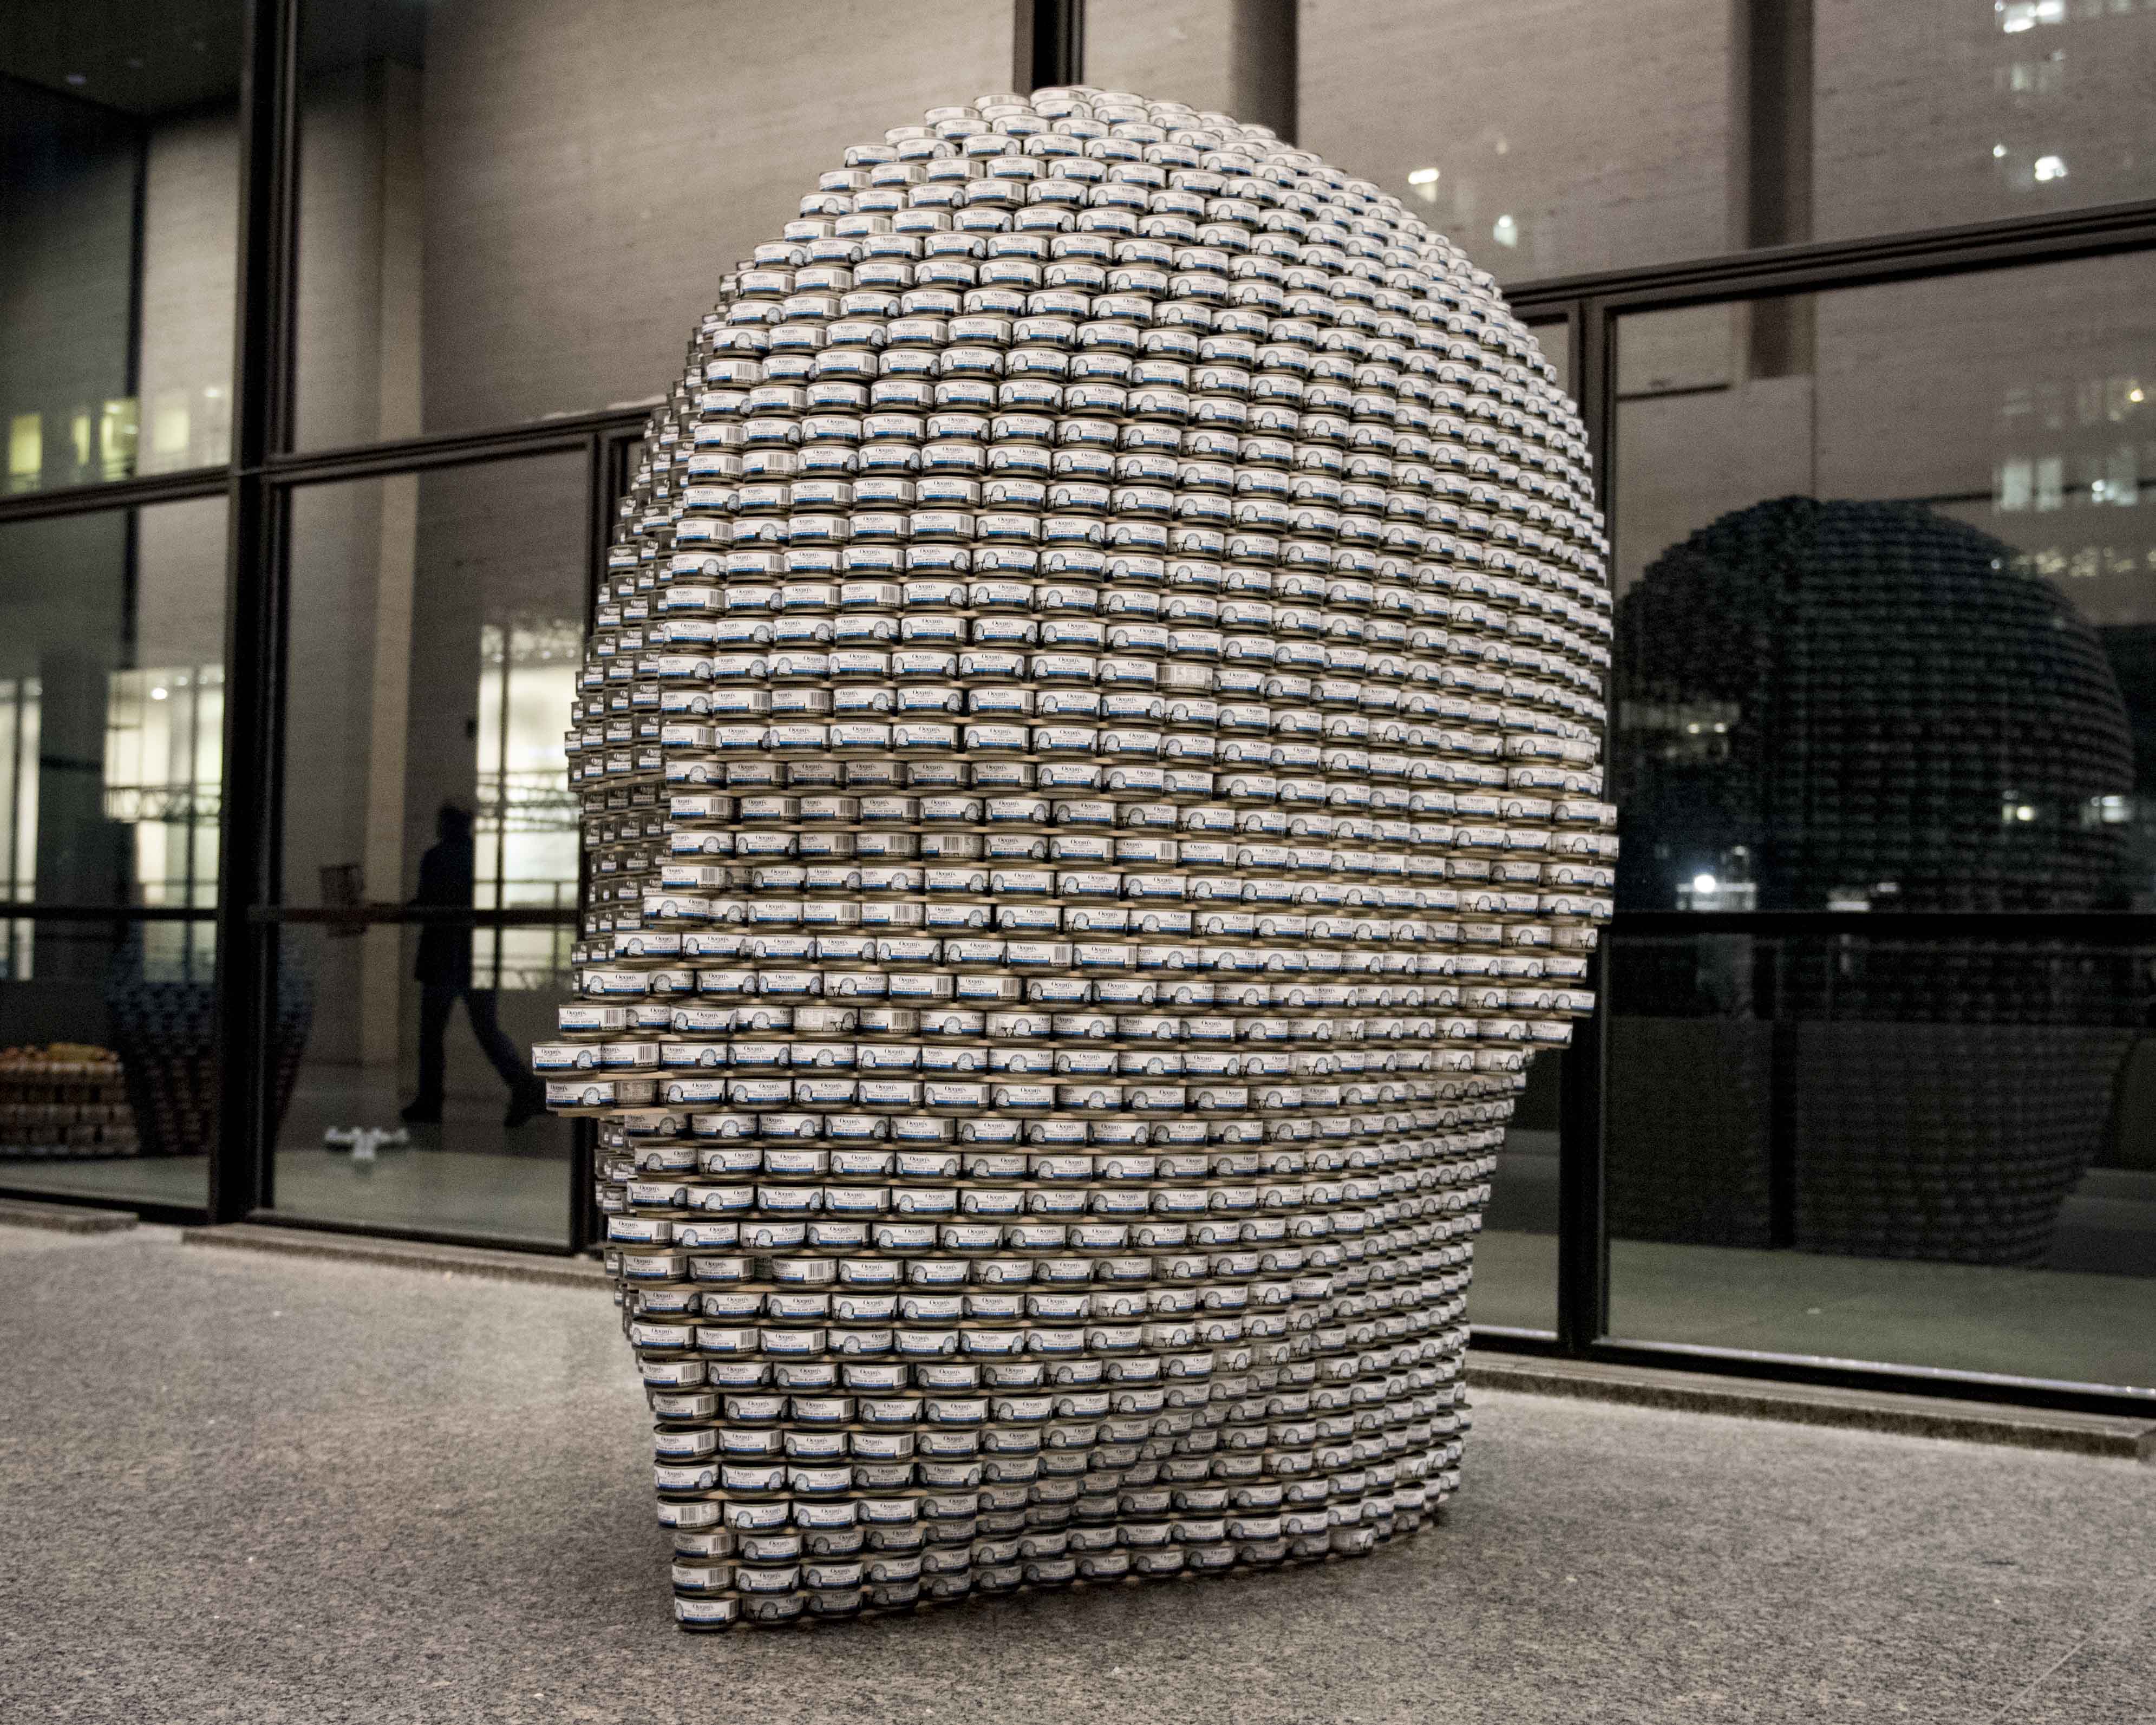 canstruction